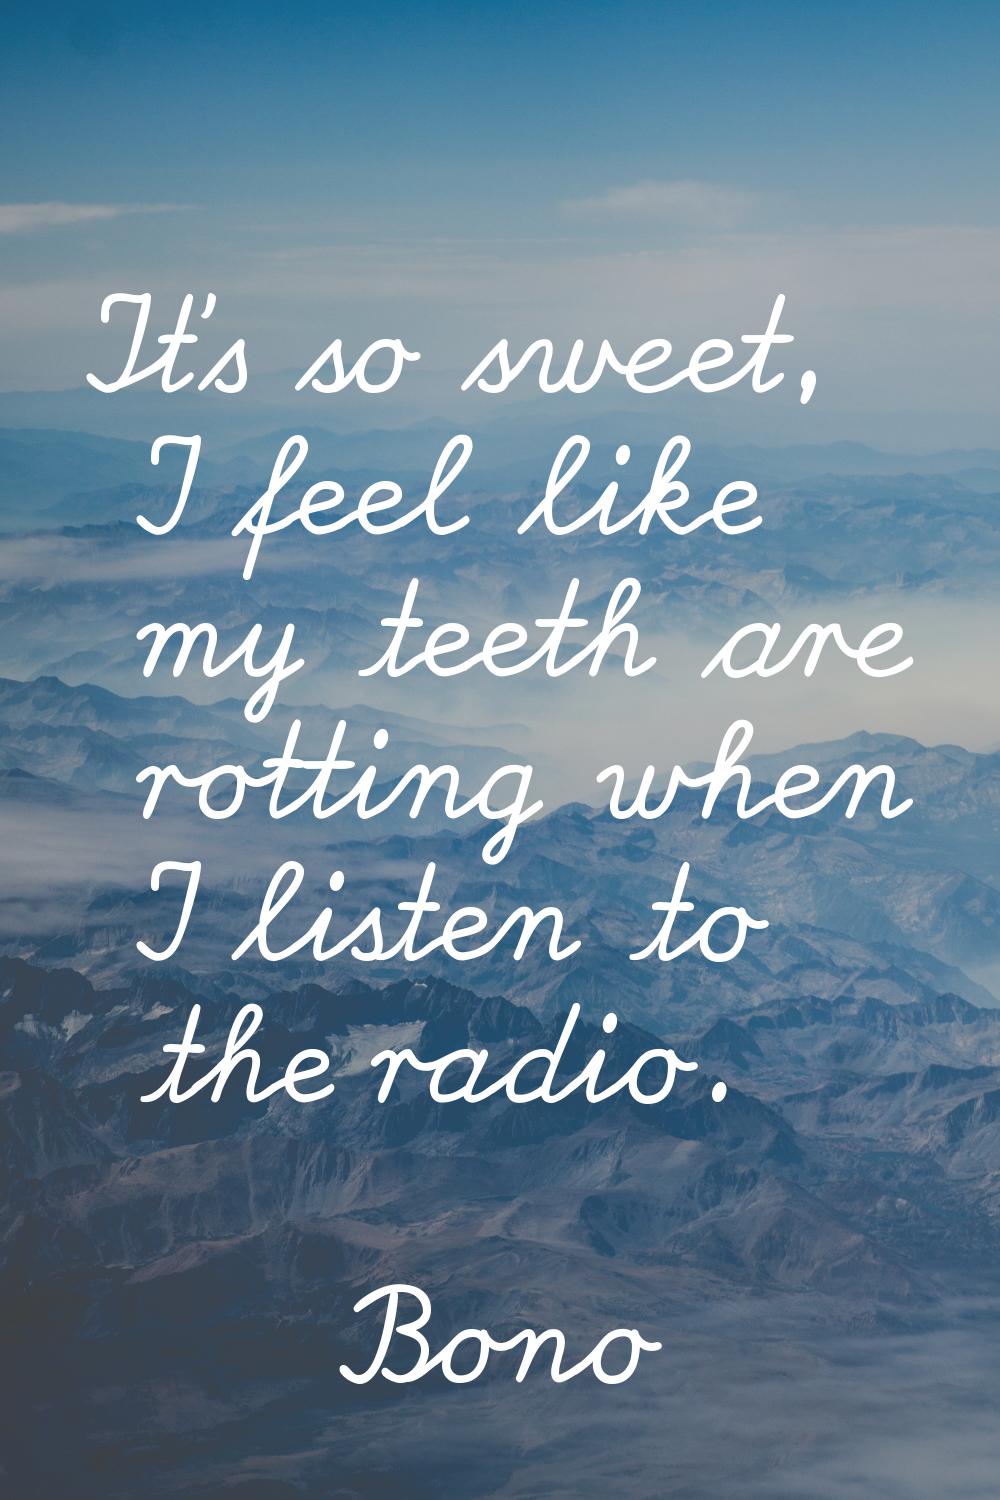 It's so sweet, I feel like my teeth are rotting when I listen to the radio.